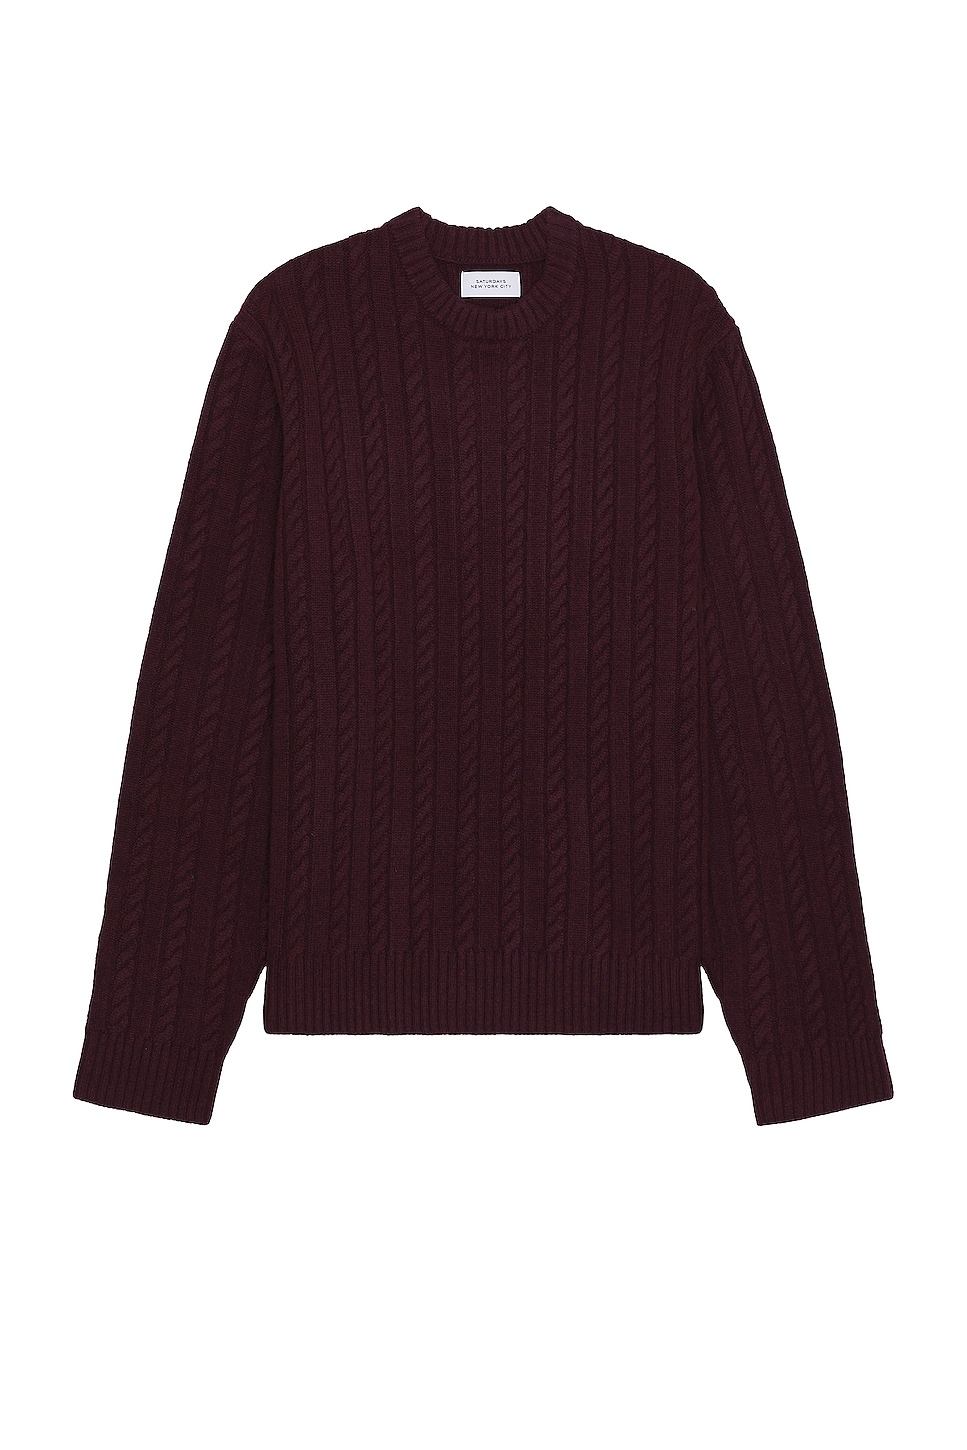 Image 1 of SATURDAYS NYC Nico Cable Knit Sweater in Chocolate Truffle